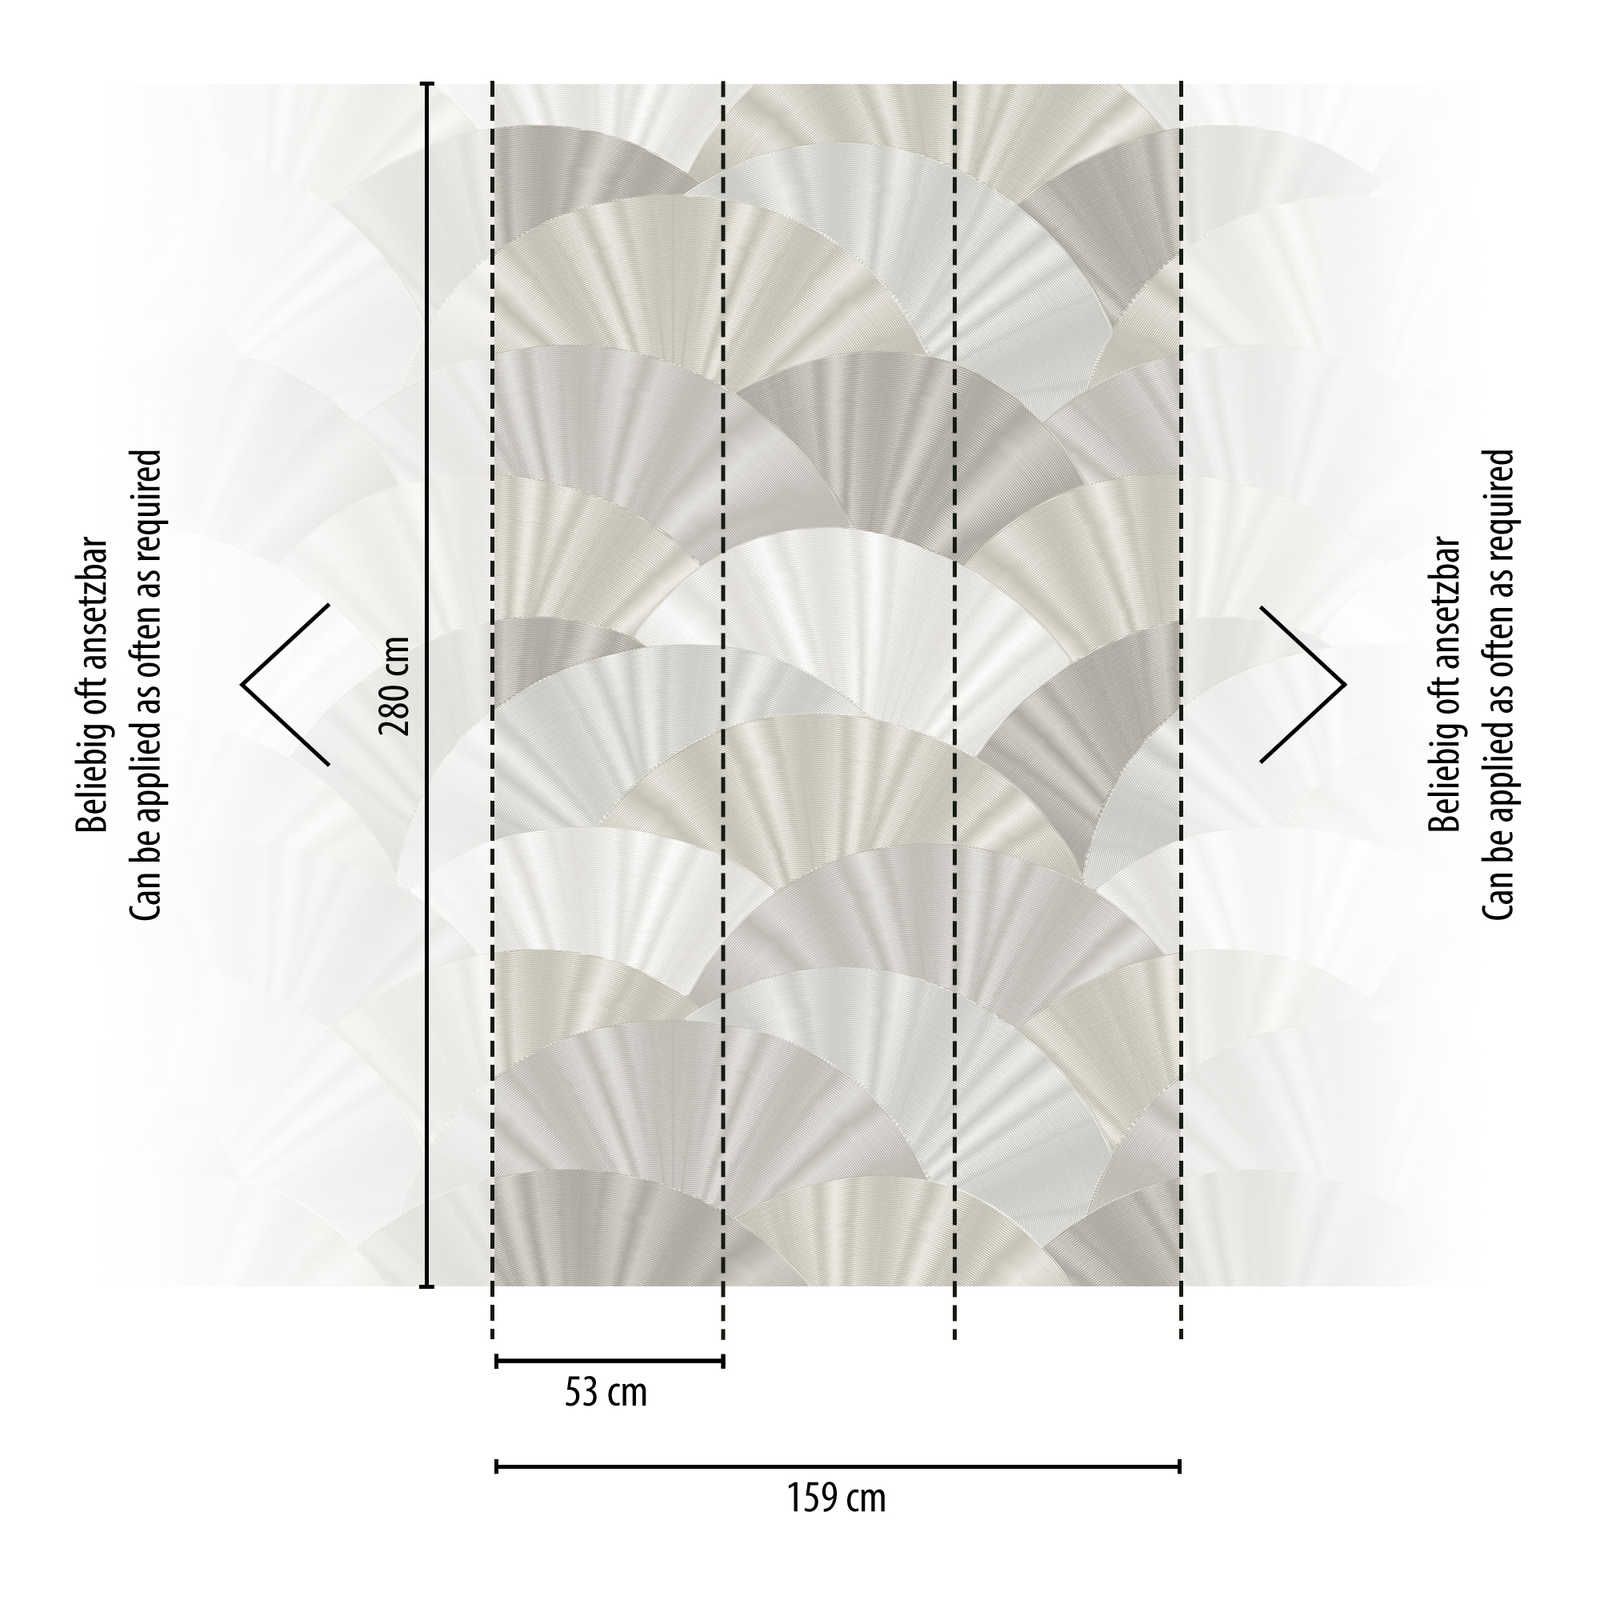             Non-woven wallpaper fan pattern with fabric look - grey, silver
        